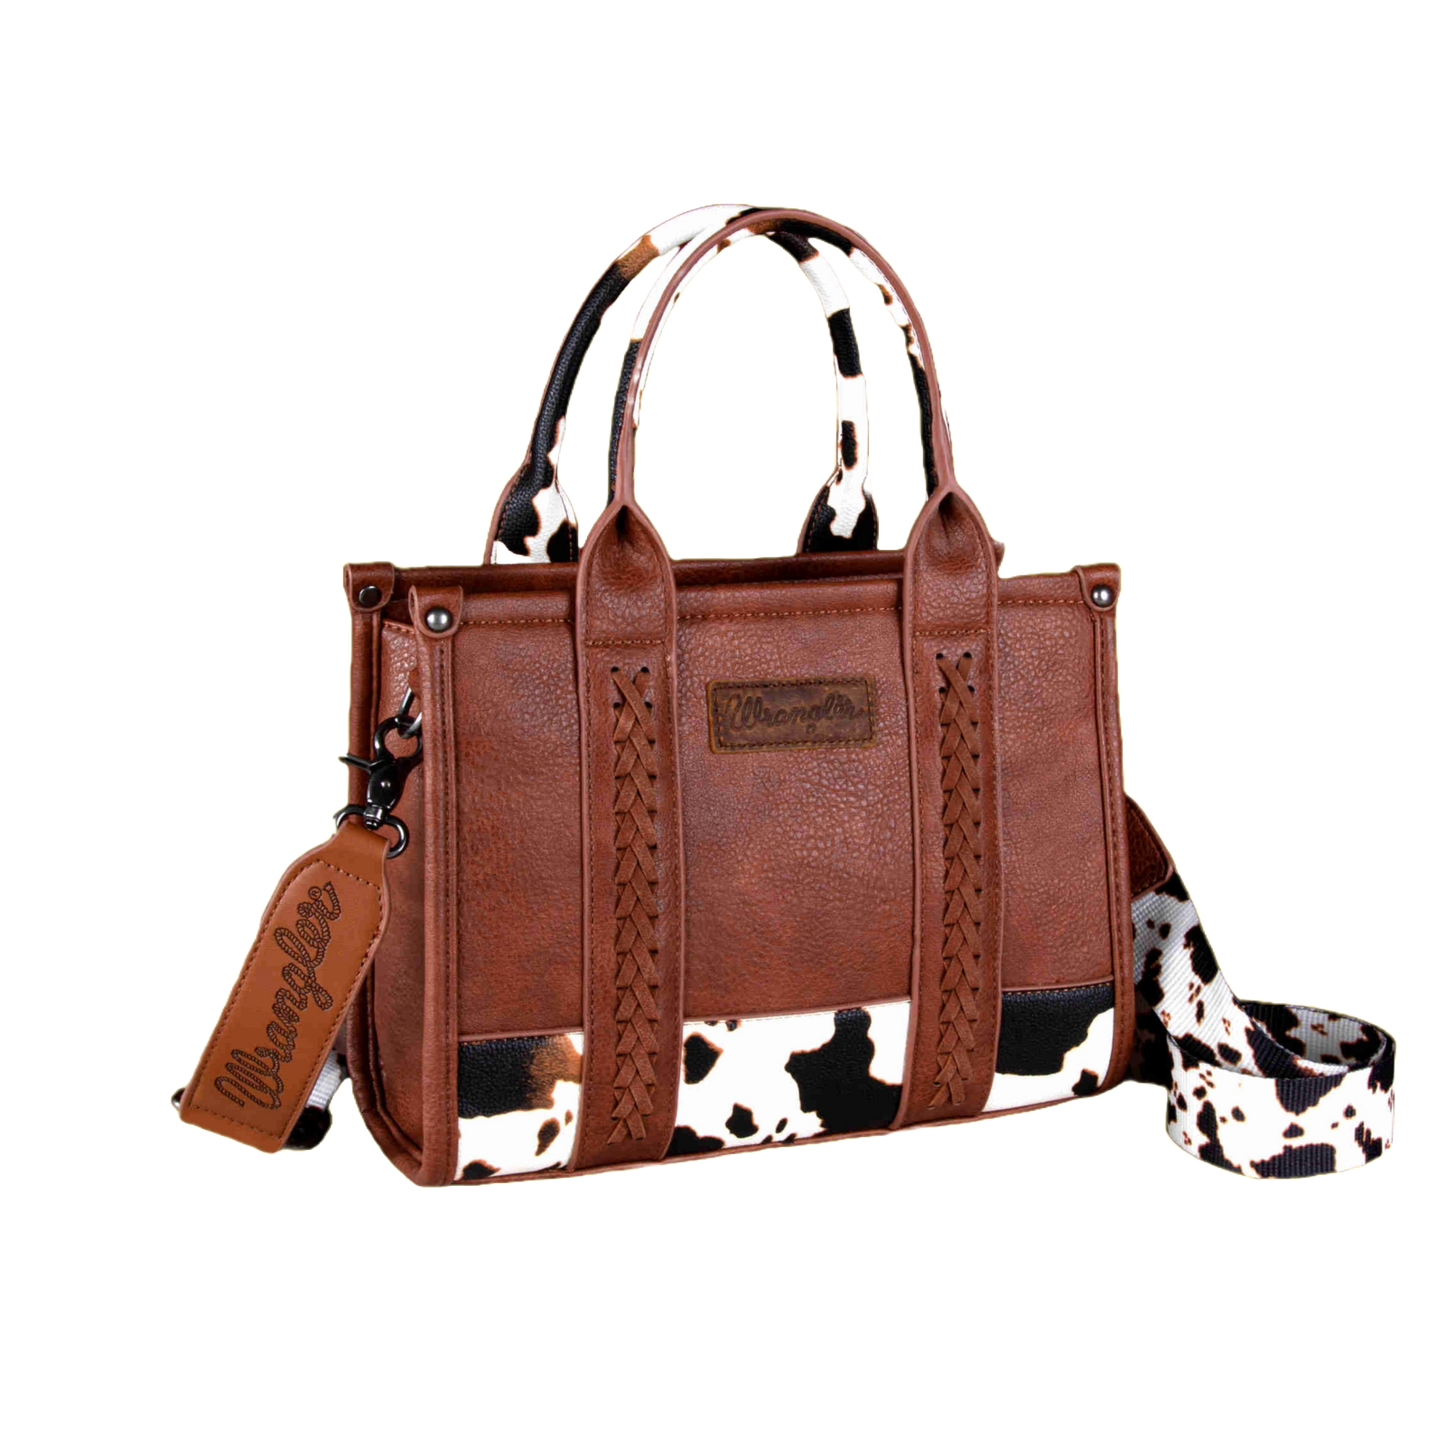 Wrangler Cow Printed Leather Concealed Carry Purse WG102-8120SBR